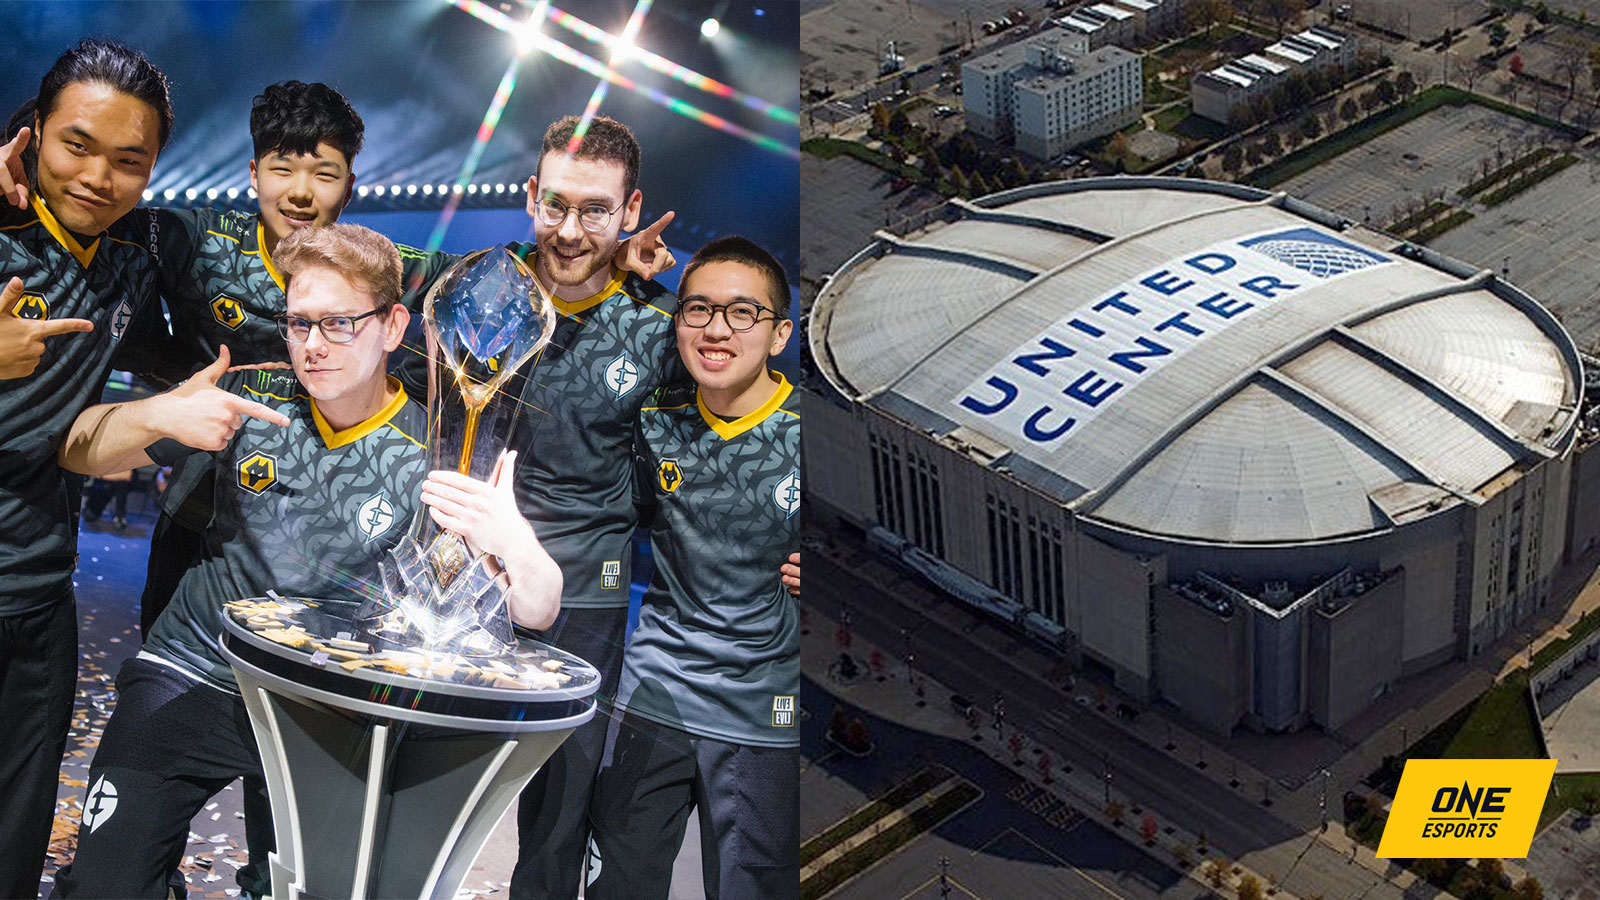 2022 LCS Championship will be held at United Center, home of Chicago Bulls ONE Esports